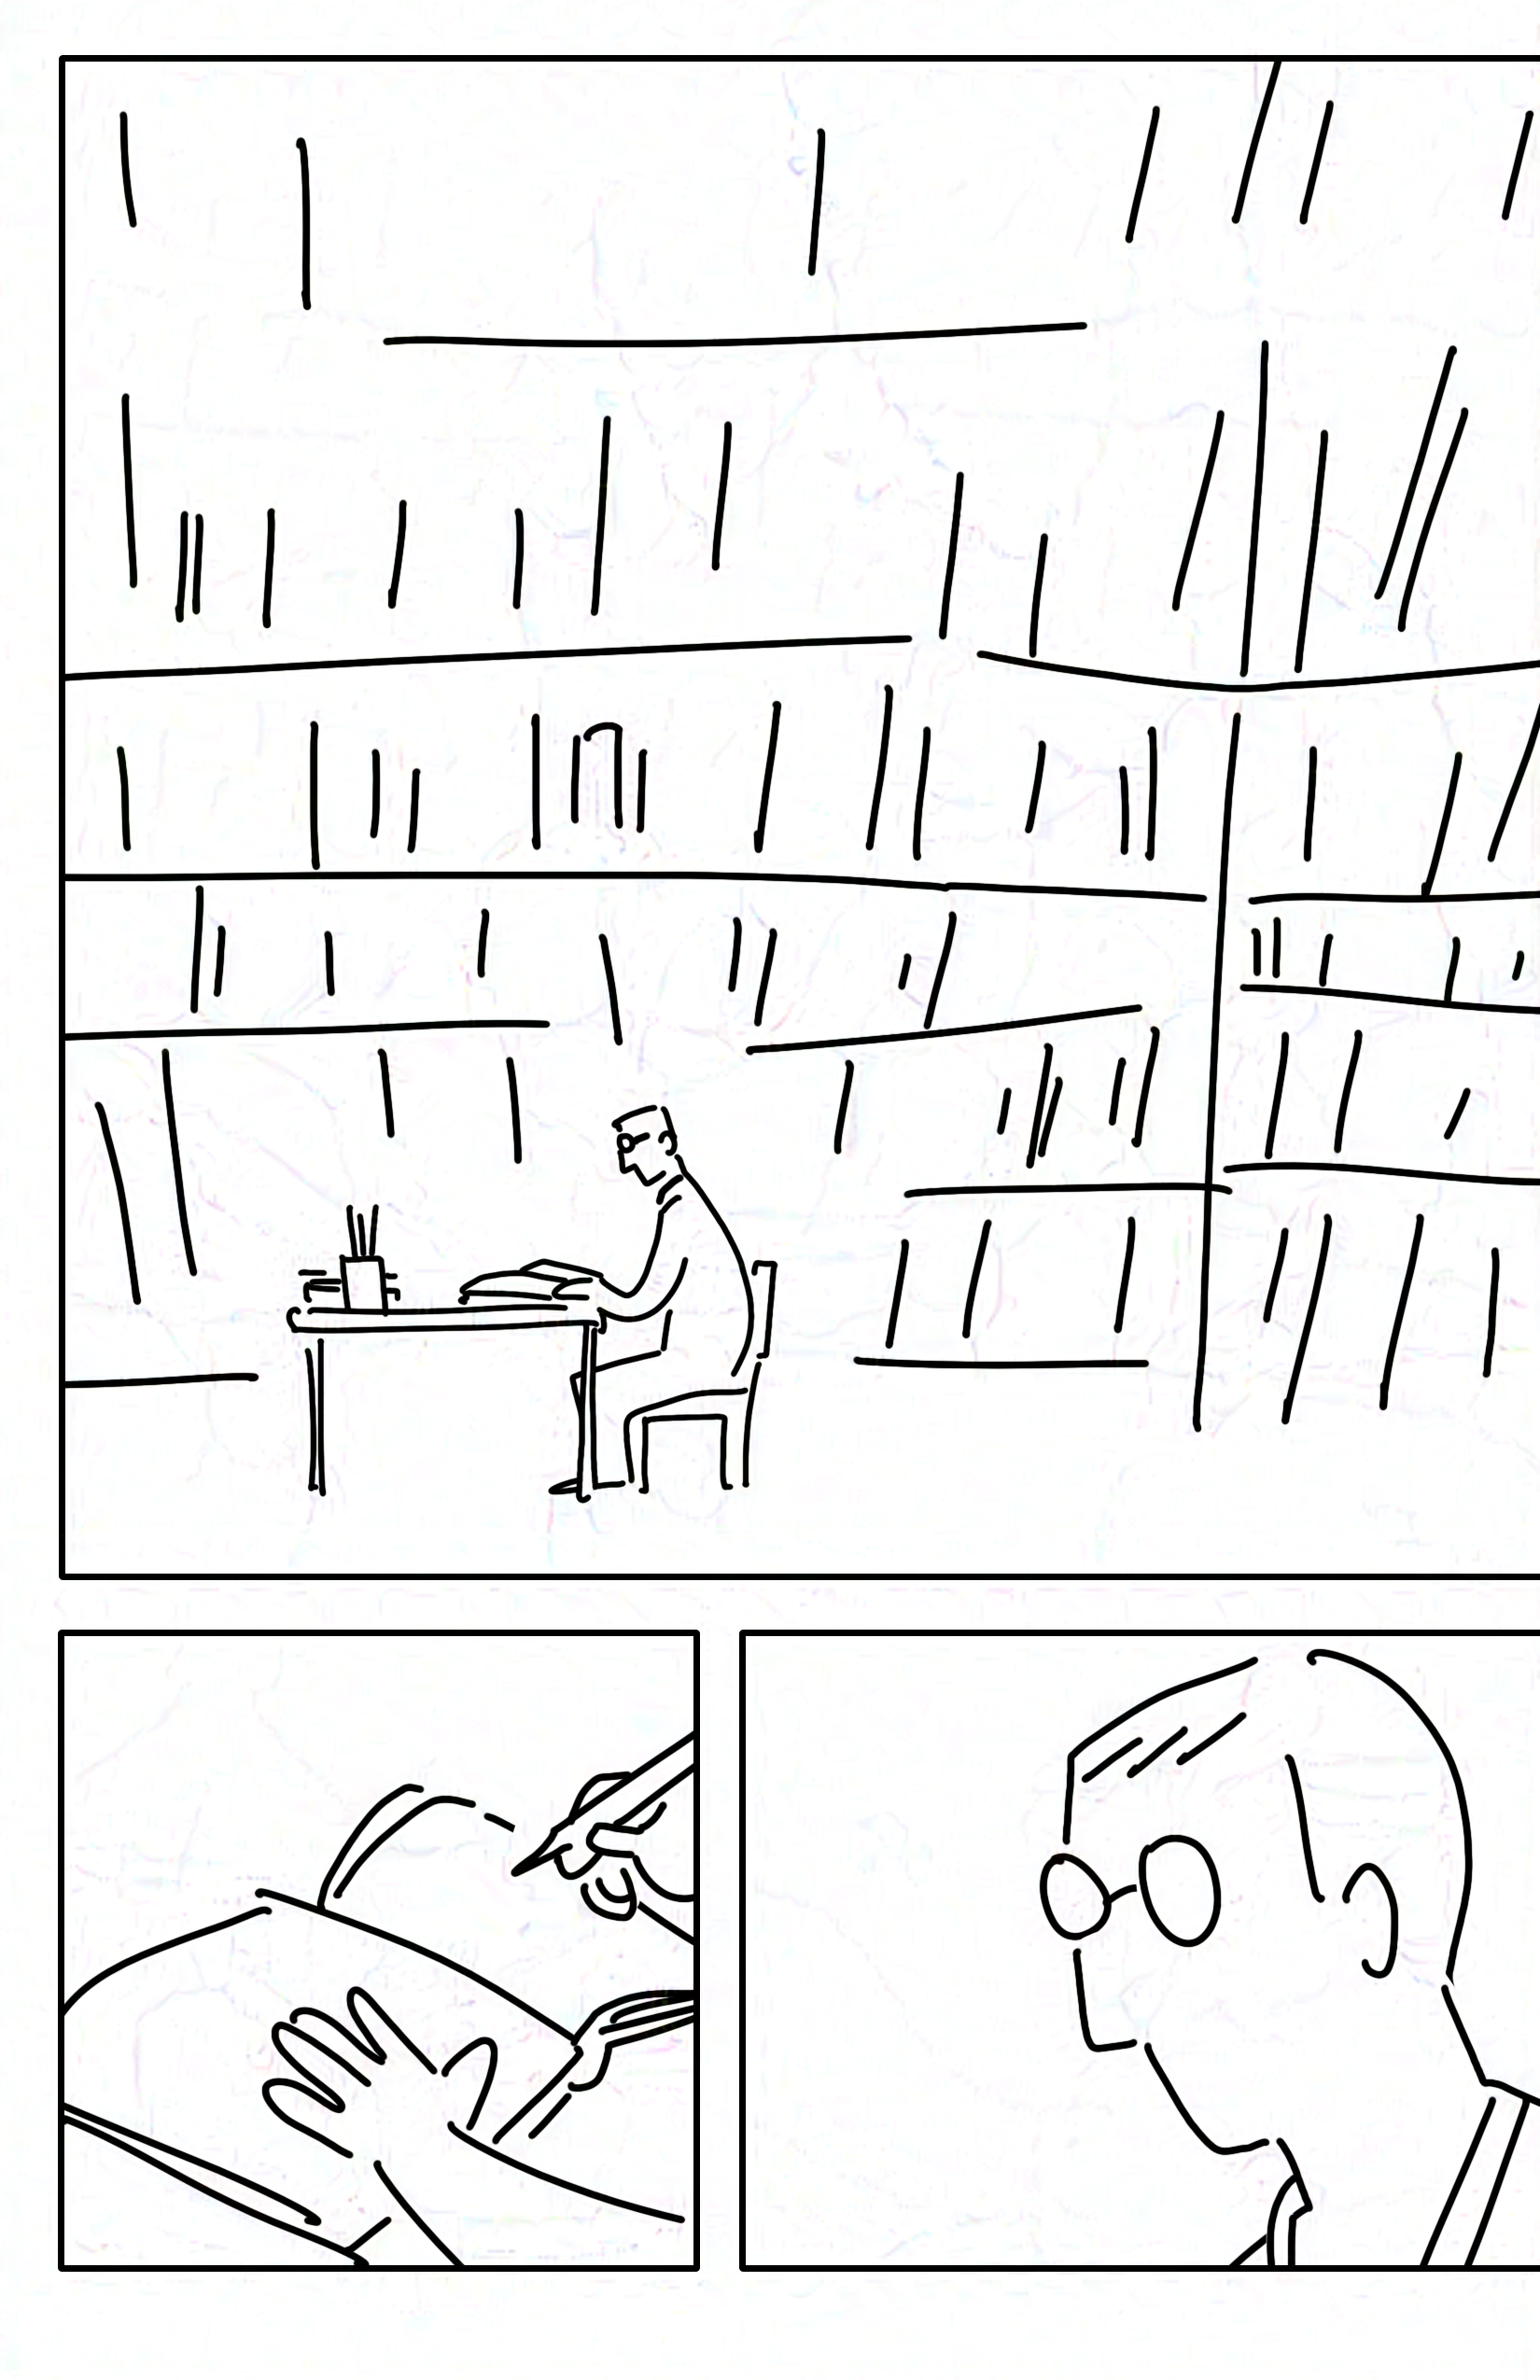 Black and white comic with simple digital drawings. Panel 1: Person with short hair and small round glasses sits at a desk with an open book in front of them. The large room has huge towering abstract bookshelves. Panel 2: Close-up to show the person's hand holding a pencil and hovering over a blank book open on the first page. Panel 3: Close-up of the person's face, it has minimal features. No mouth or eyes can be seen as it looks down. The edge of a lanyard can be seen around their neck.